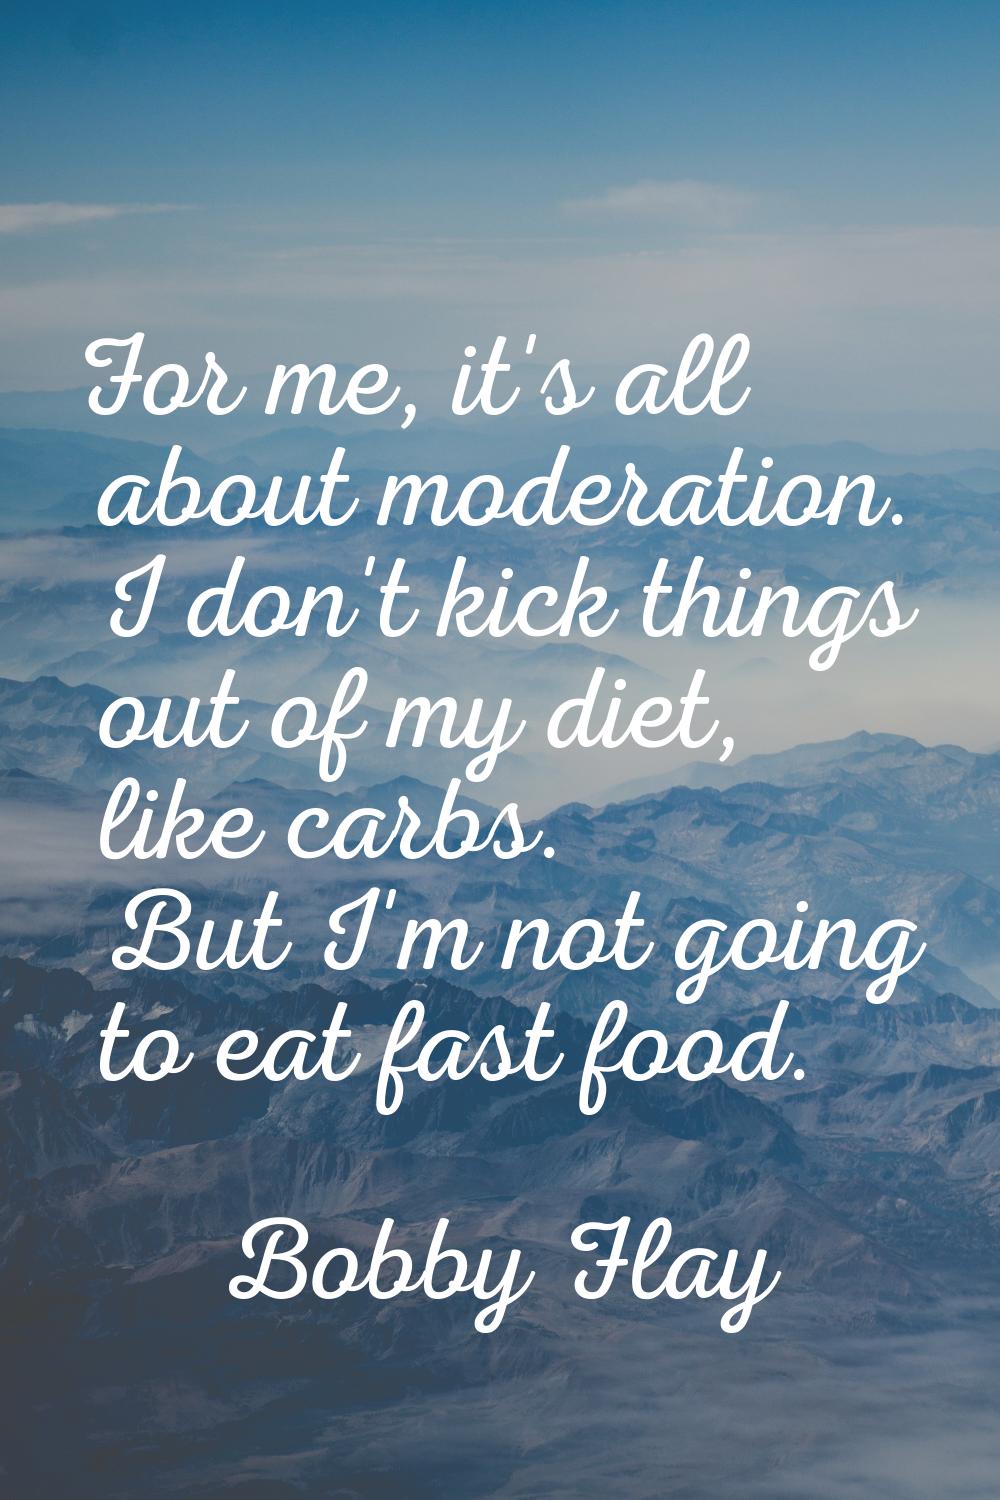 For me, it's all about moderation. I don't kick things out of my diet, like carbs. But I'm not goin